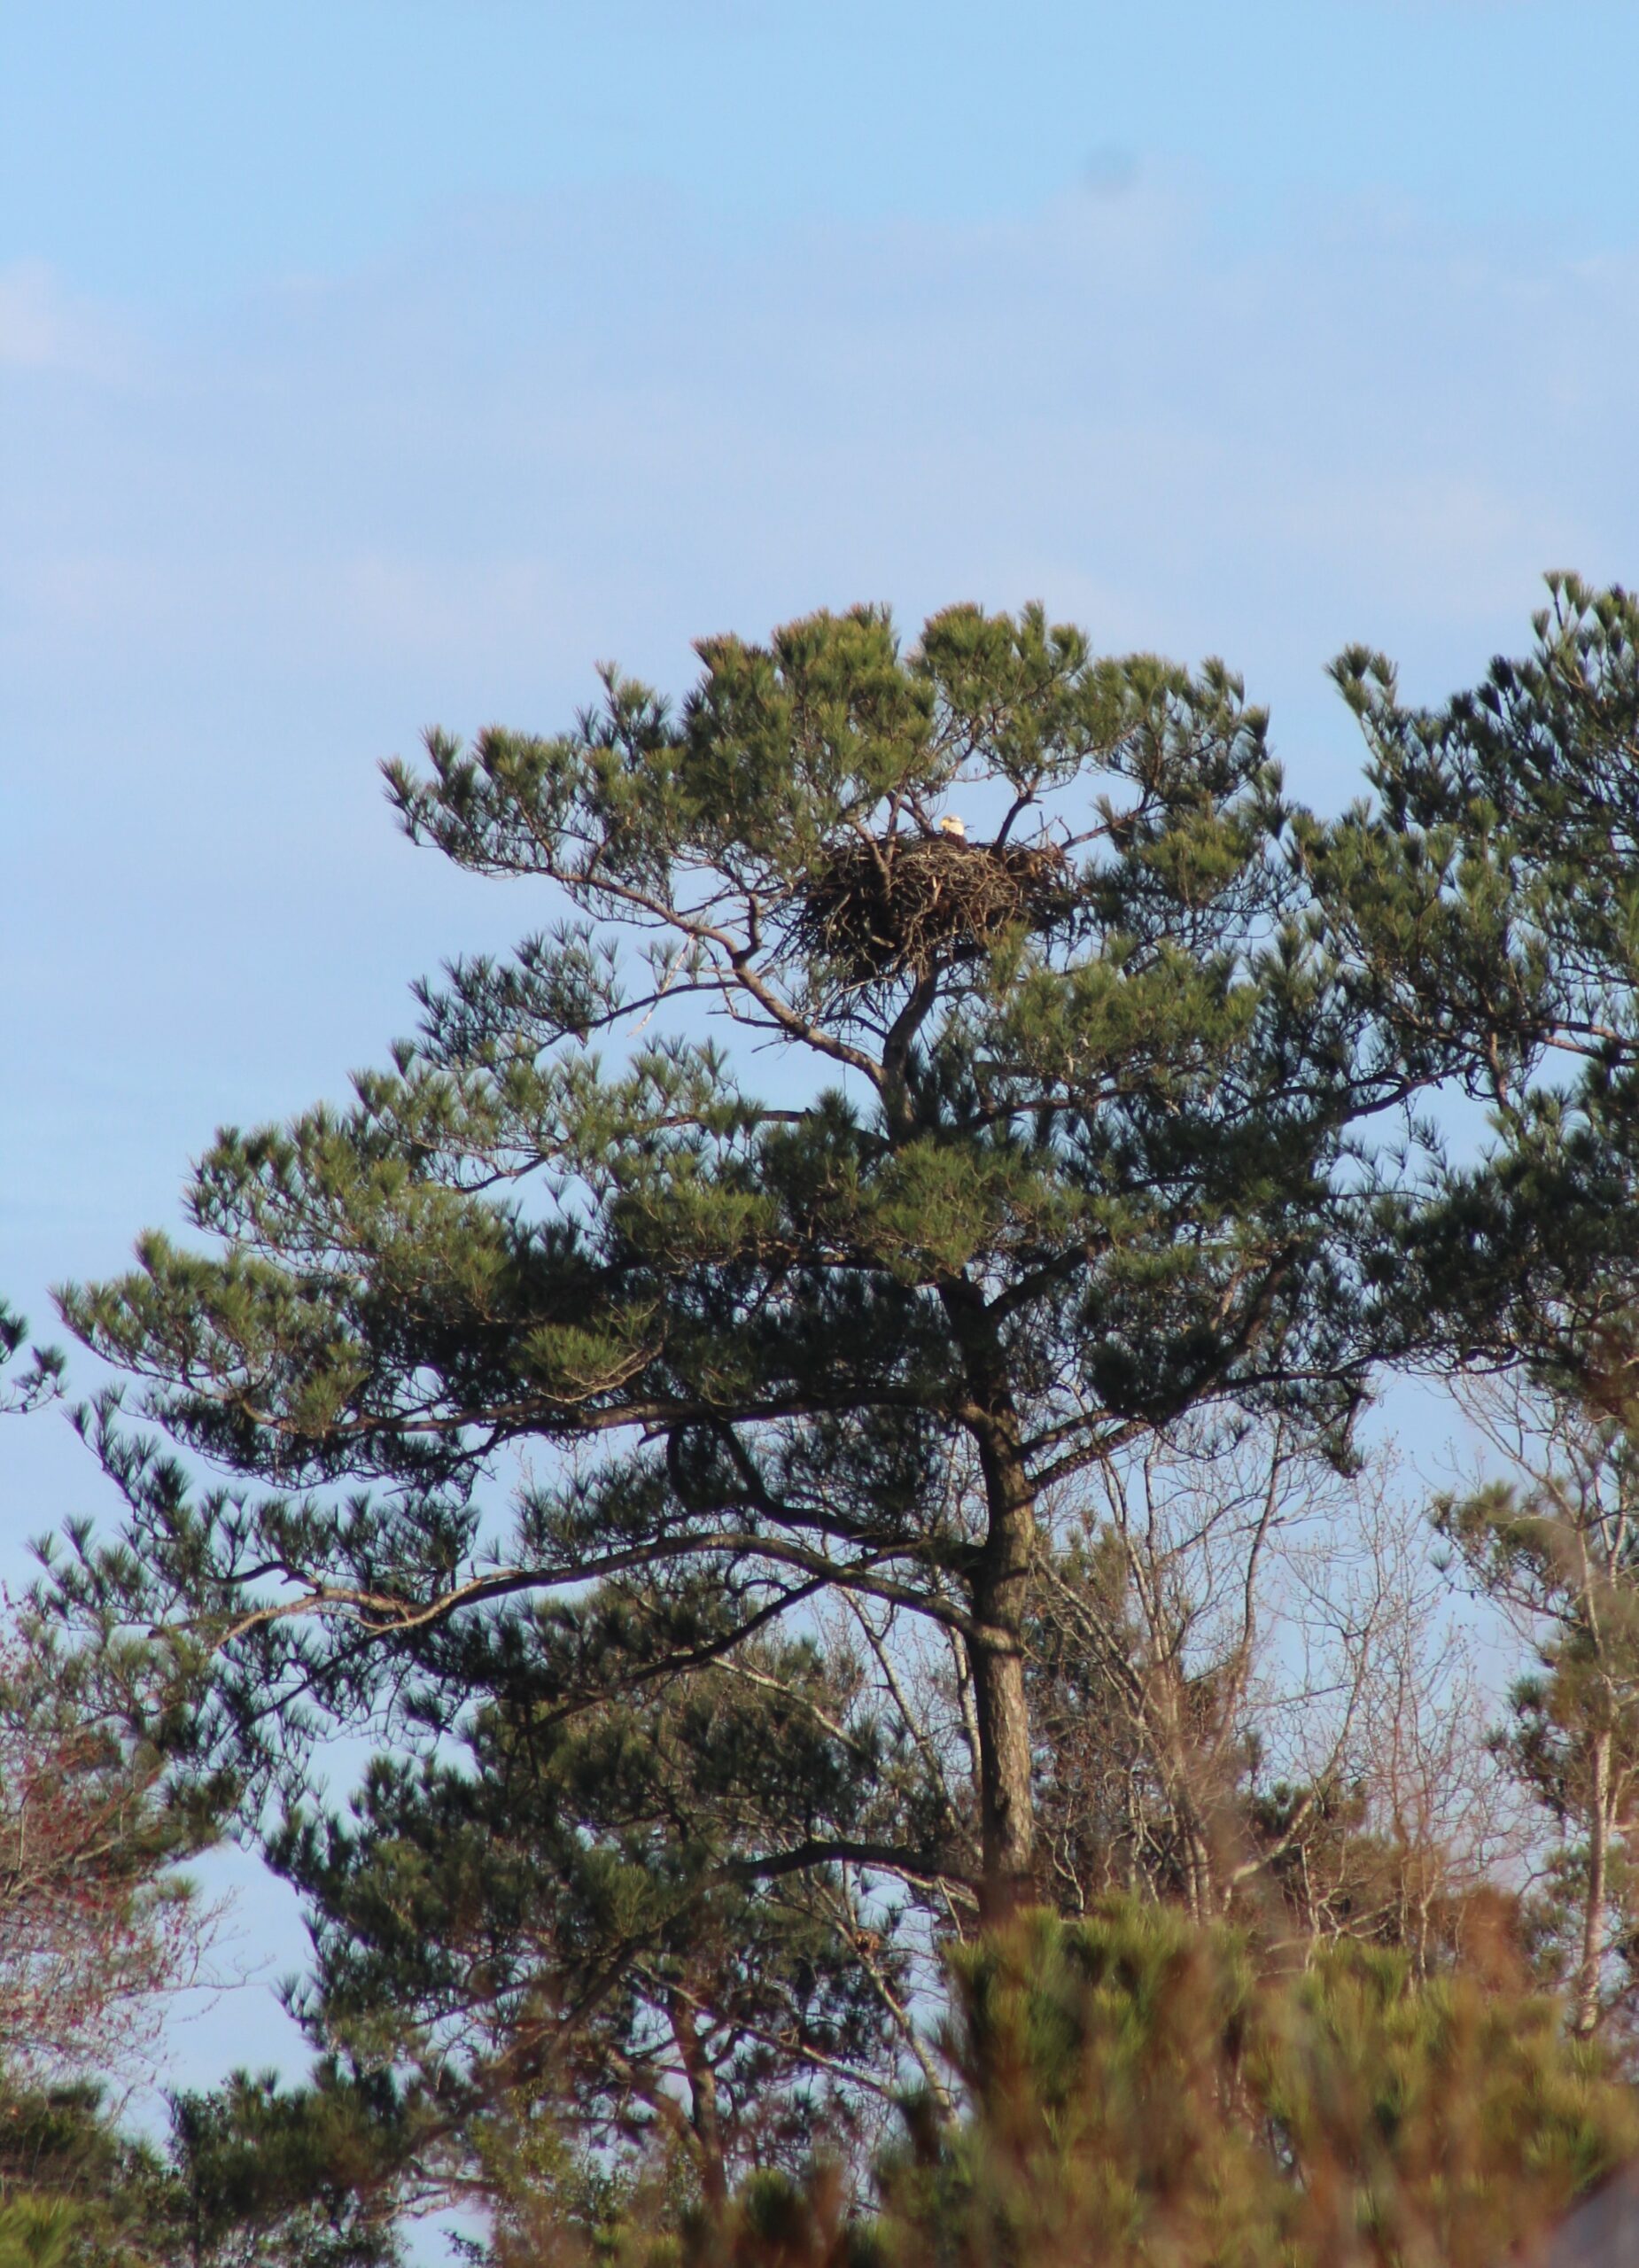 A large stick nest can be seen at the very top of a pine tree. A Bald Eagle's head can be seen looking out of the nest.